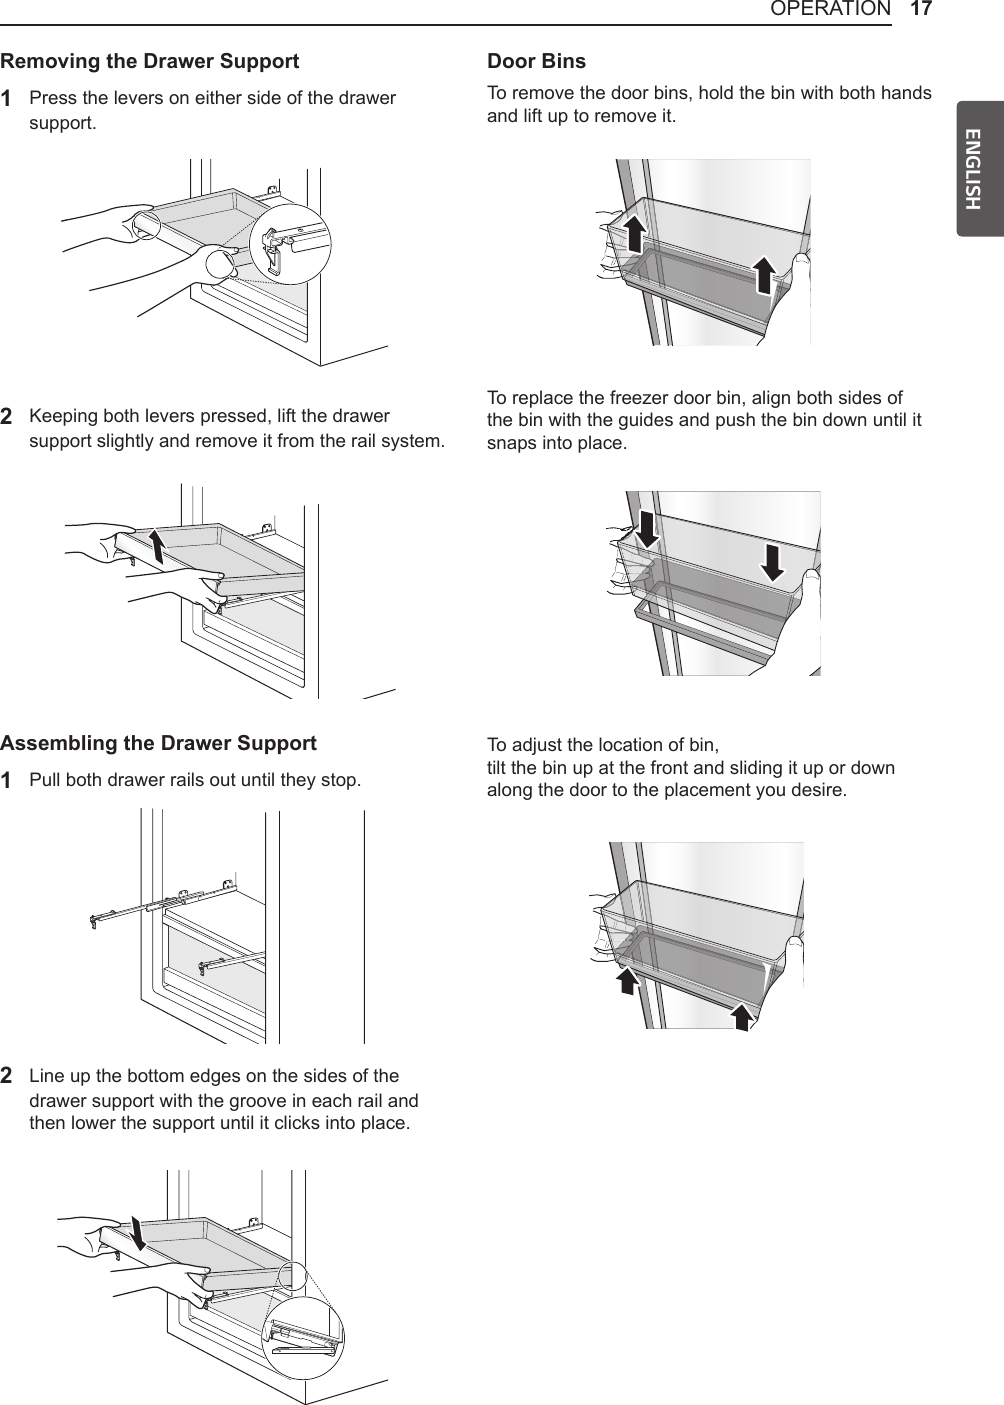 17OPERATIONENGLISHRemoving the Drawer Support1  Press the levers on either side of the drawer support.2 Keeping both levers pressed, lift the drawer support slightly and remove it from the rail system.Assembling the Drawer Support1  Pull both drawer rails out until they stop.2 Line up the bottom edges on the sides of the drawer support with the groove in each rail and then lower the support until it clicks into place.Door BinsTo remove the door bins, hold the bin with both hands and lift up to remove it.To replace the freezer door bin, align both sides of the bin with the guides and push the bin down until it snaps into place.To adjust the location of bin, tilt the bin up at the front and sliding it up or down along the door to the placement you desire.